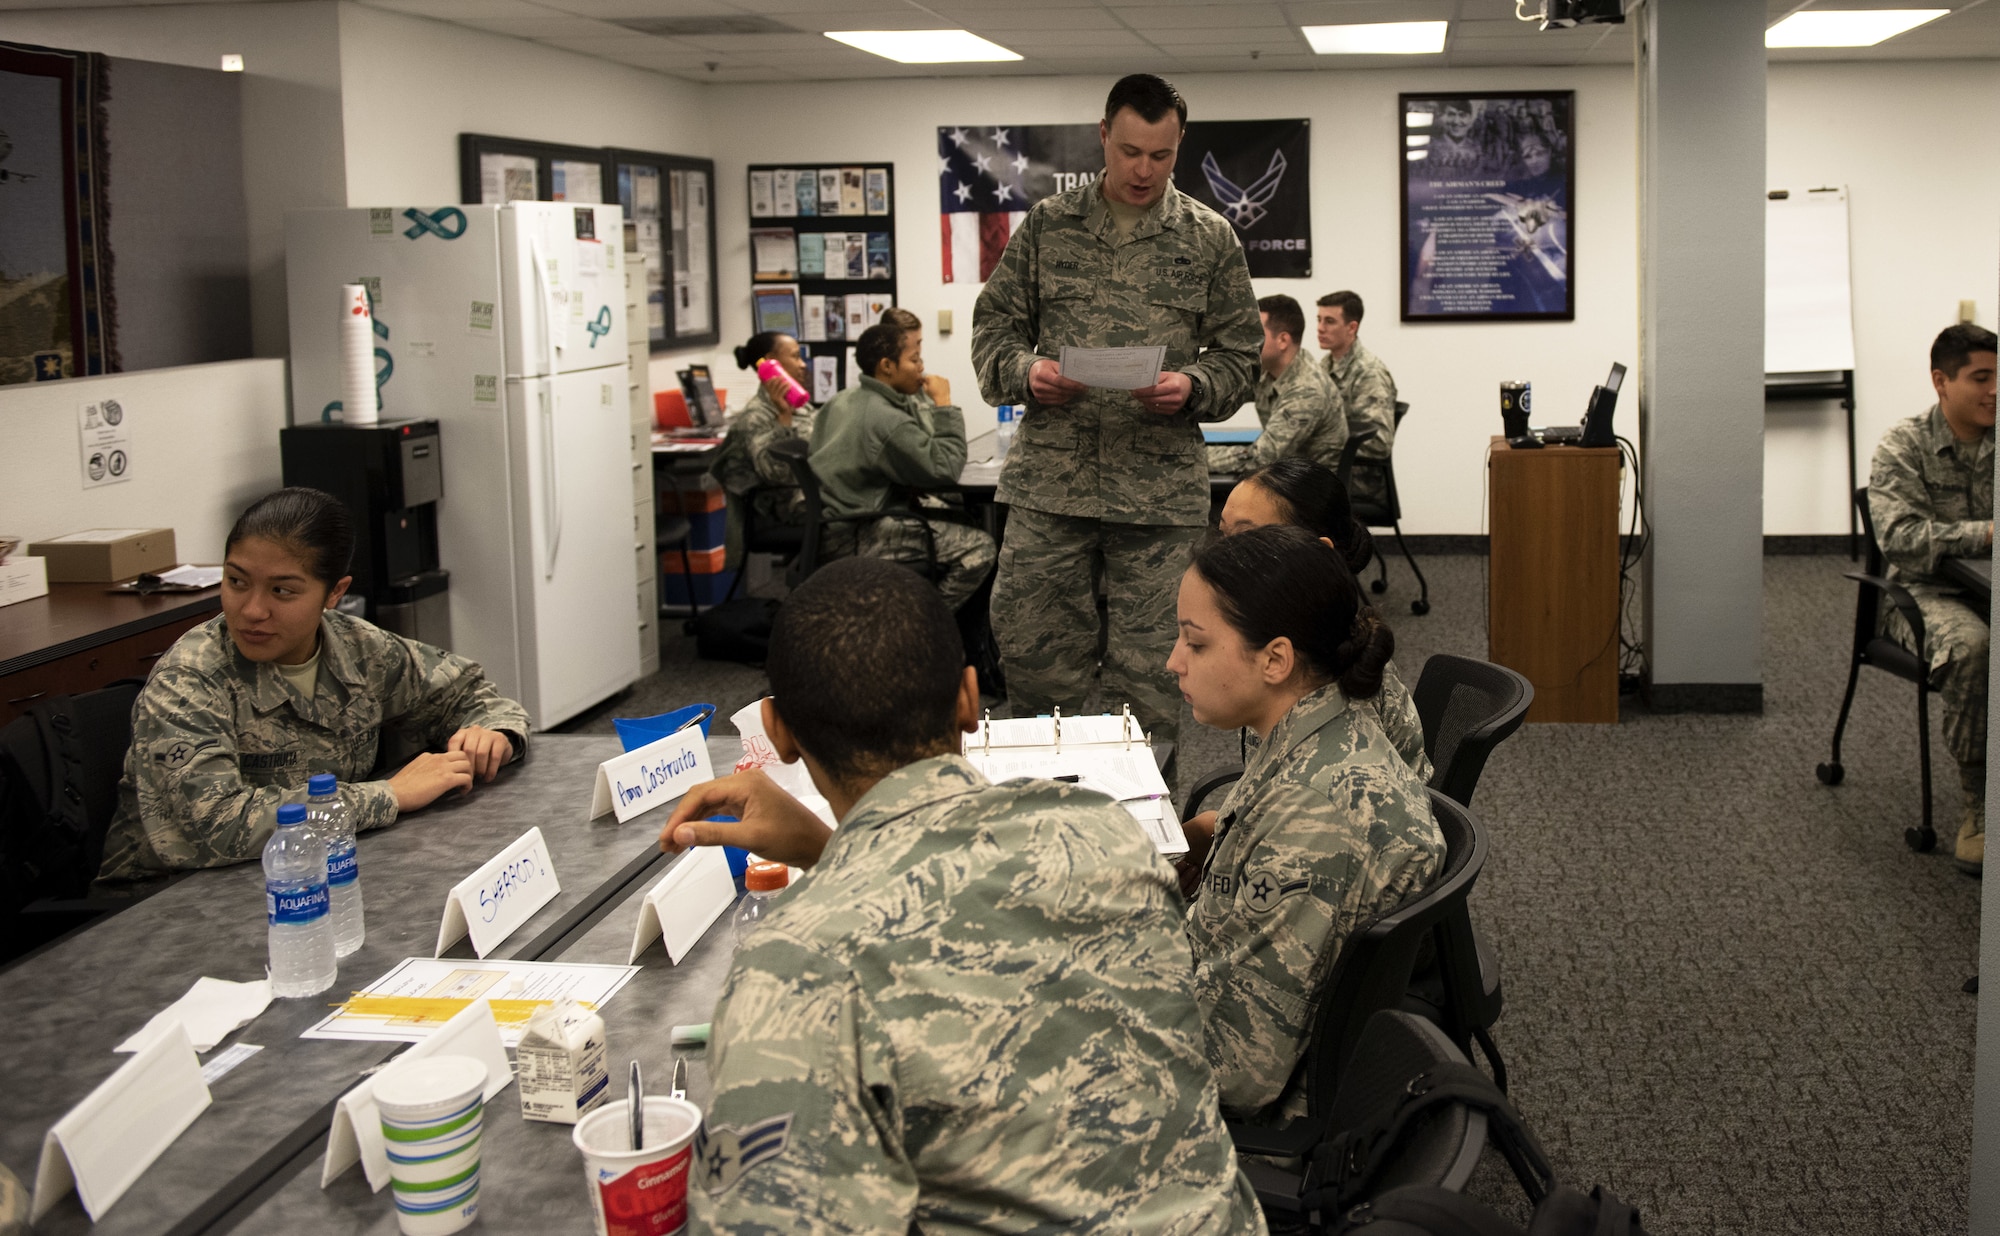 U.S. Air Force Tech. Sgt. Nathaniel Hyder, 821st Contingency Response Support Squadron equipment technician, instructs Airmen who are in the First Term Airman Course class Jan. 10, 2019, at Travis Air Force Base, Calif. Hyder is the FTAC team lead where he oversees Airmen who are transitioning from the technical training atmosphere to the operational Air Force. (U.S. Air Force photo by Airman 1st Class Jonathon Carnell)